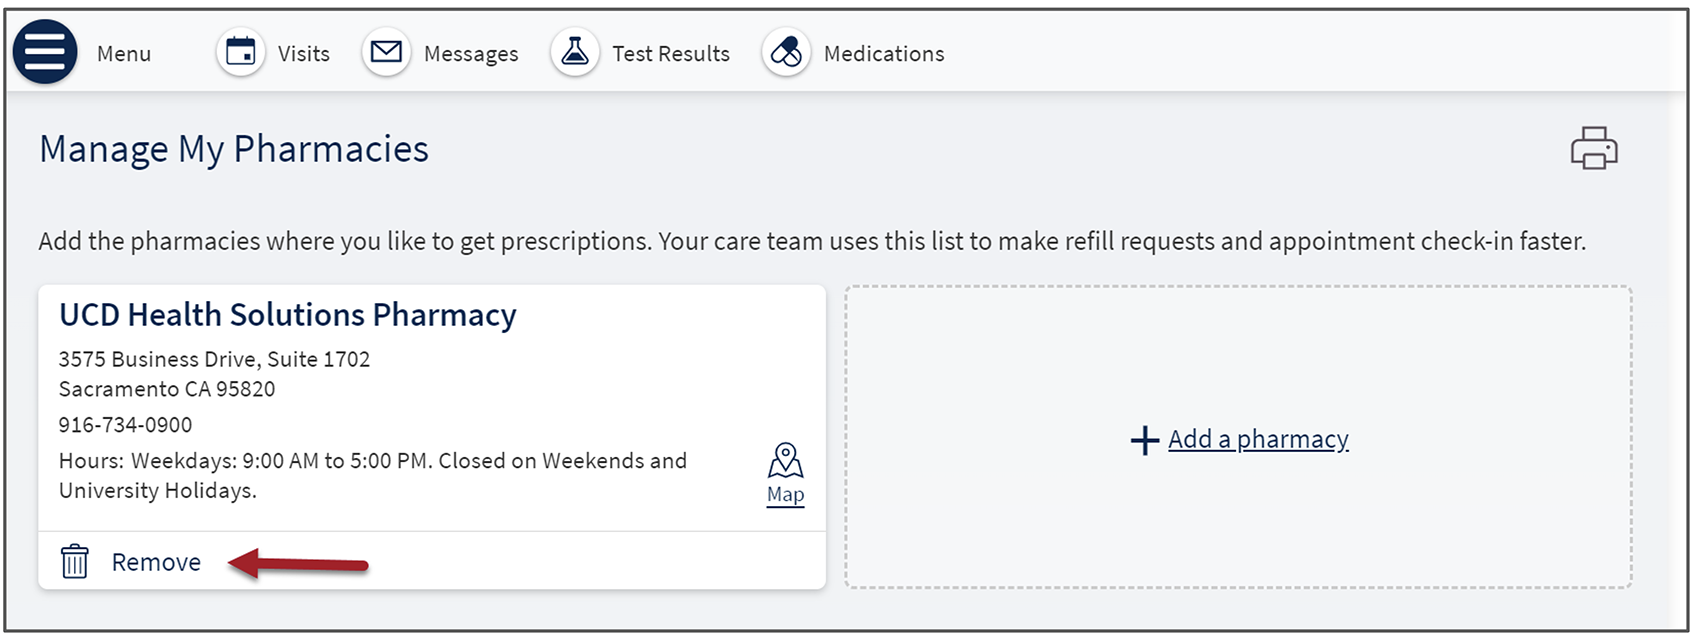 To remove a pharmacy from the list, click the Remove button.